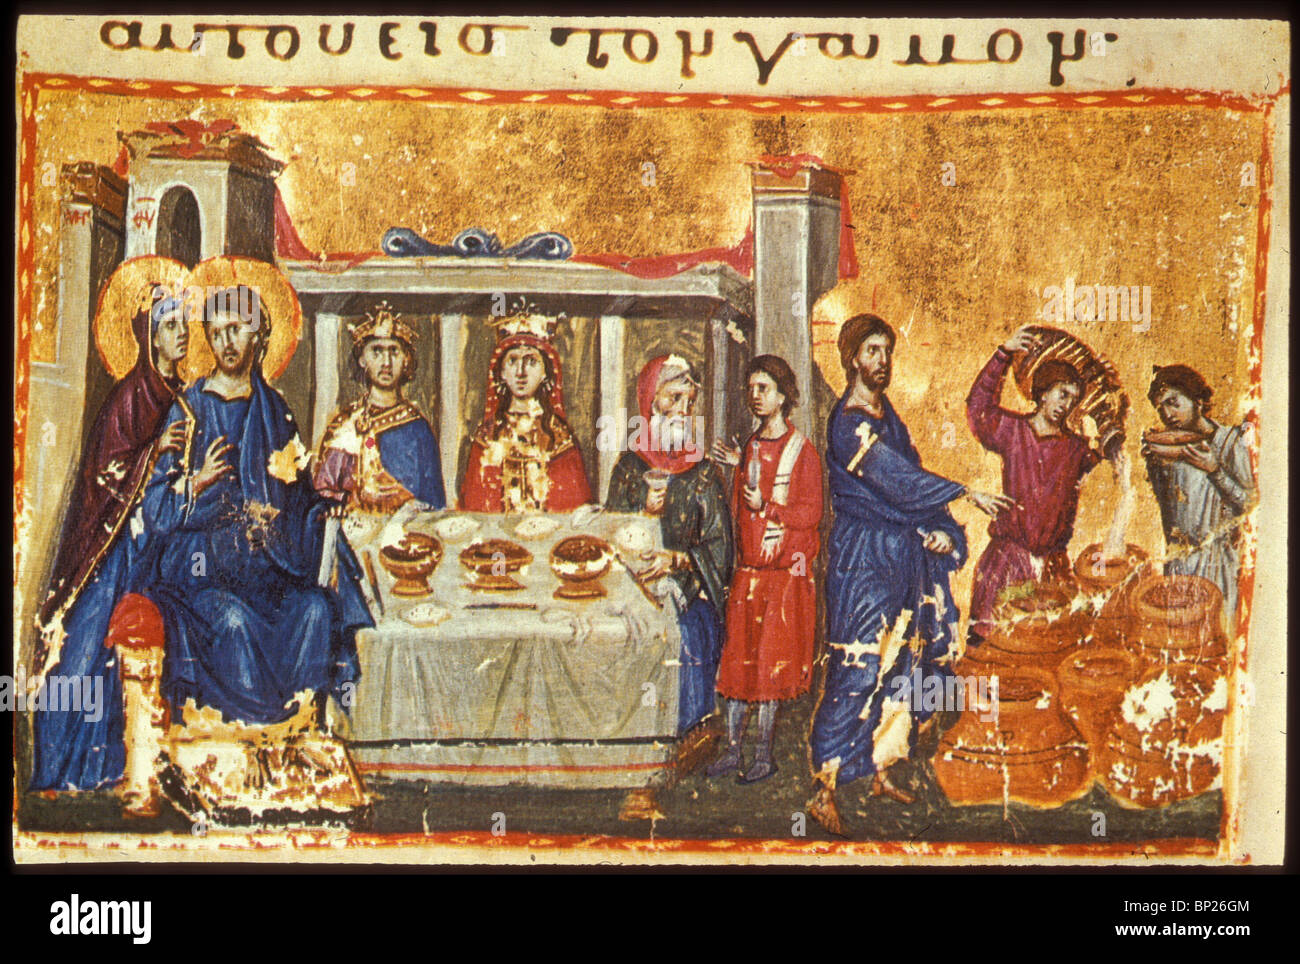 1082. THE MARRIAGE AT CANA, DRAWING FROM CODEX 5, A 15TH C. ILLUMINATED MANUSCRIPT FROM THE MONASTERY OF IVERON ON MT. ATHOS Stock Photo